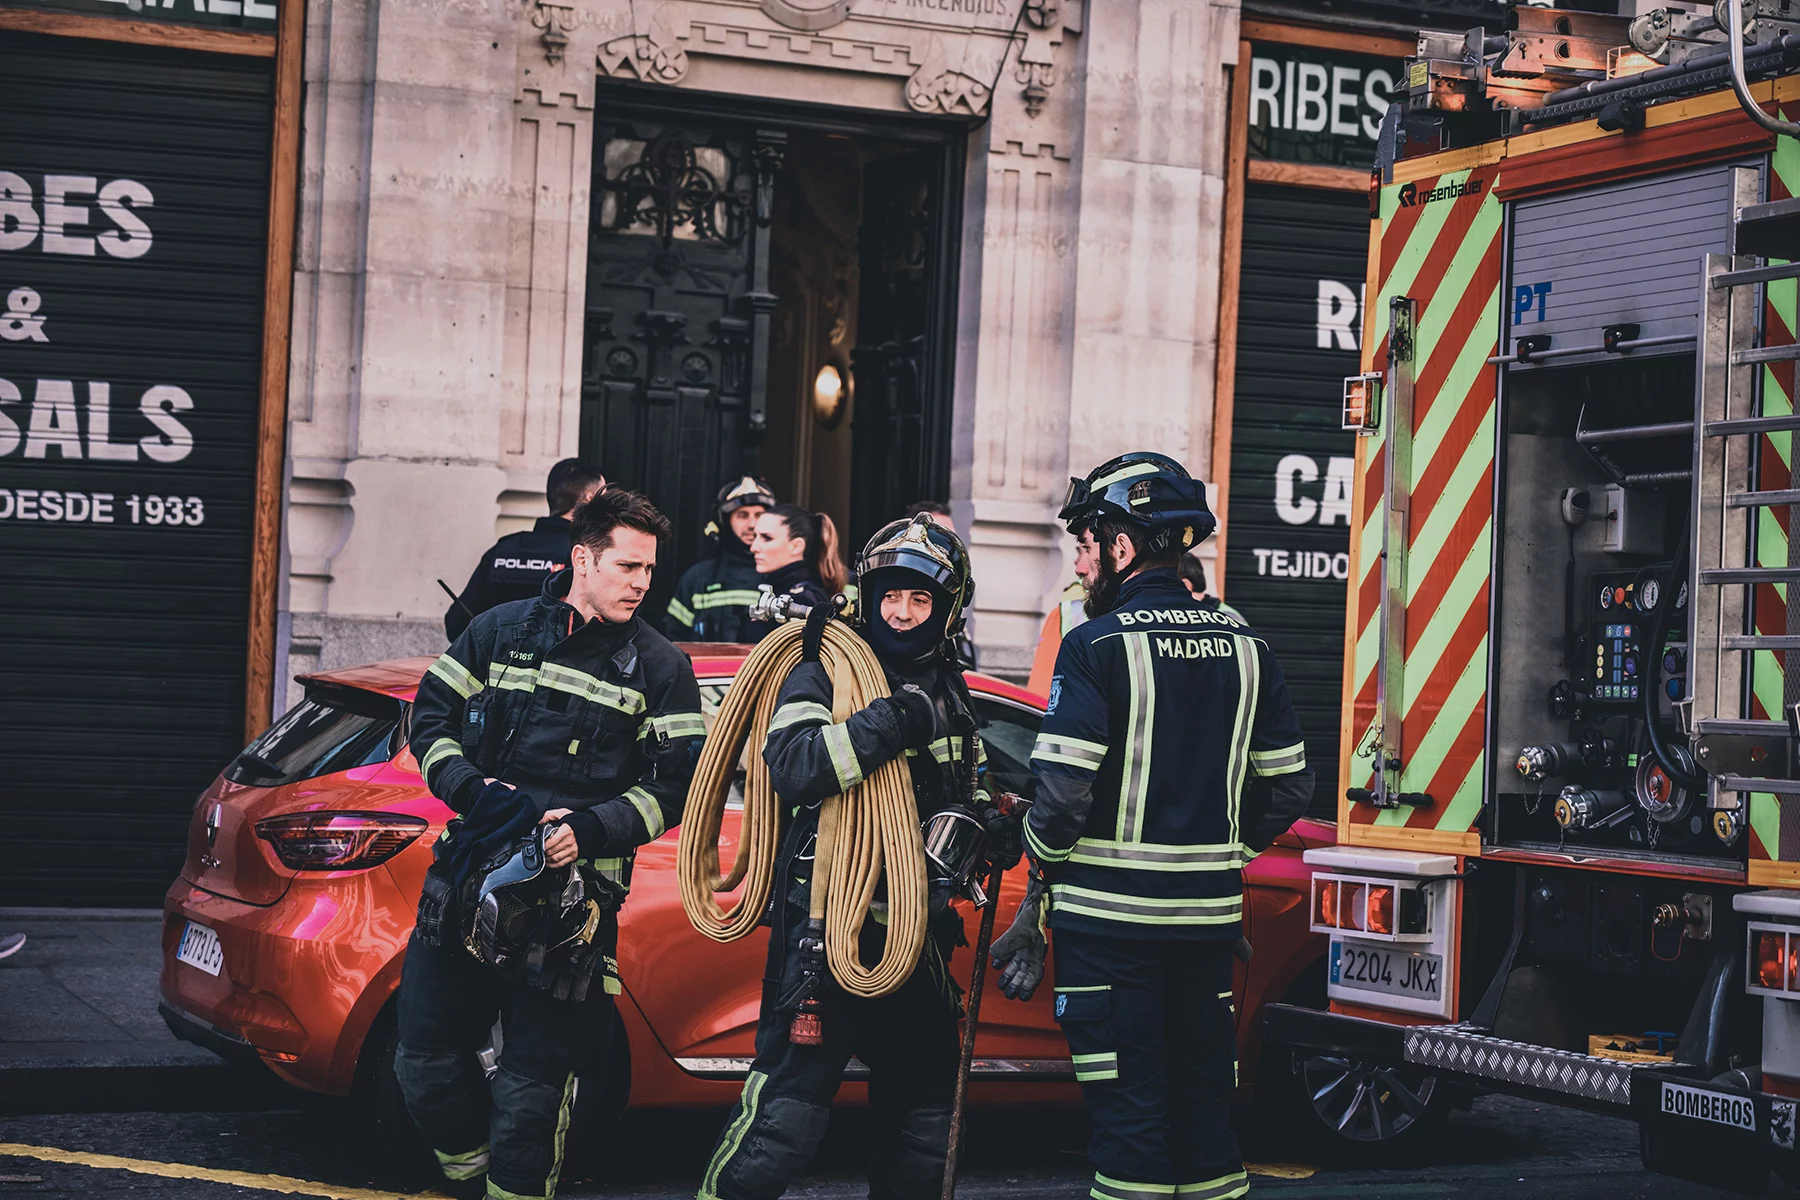 Firefighters in Madrid